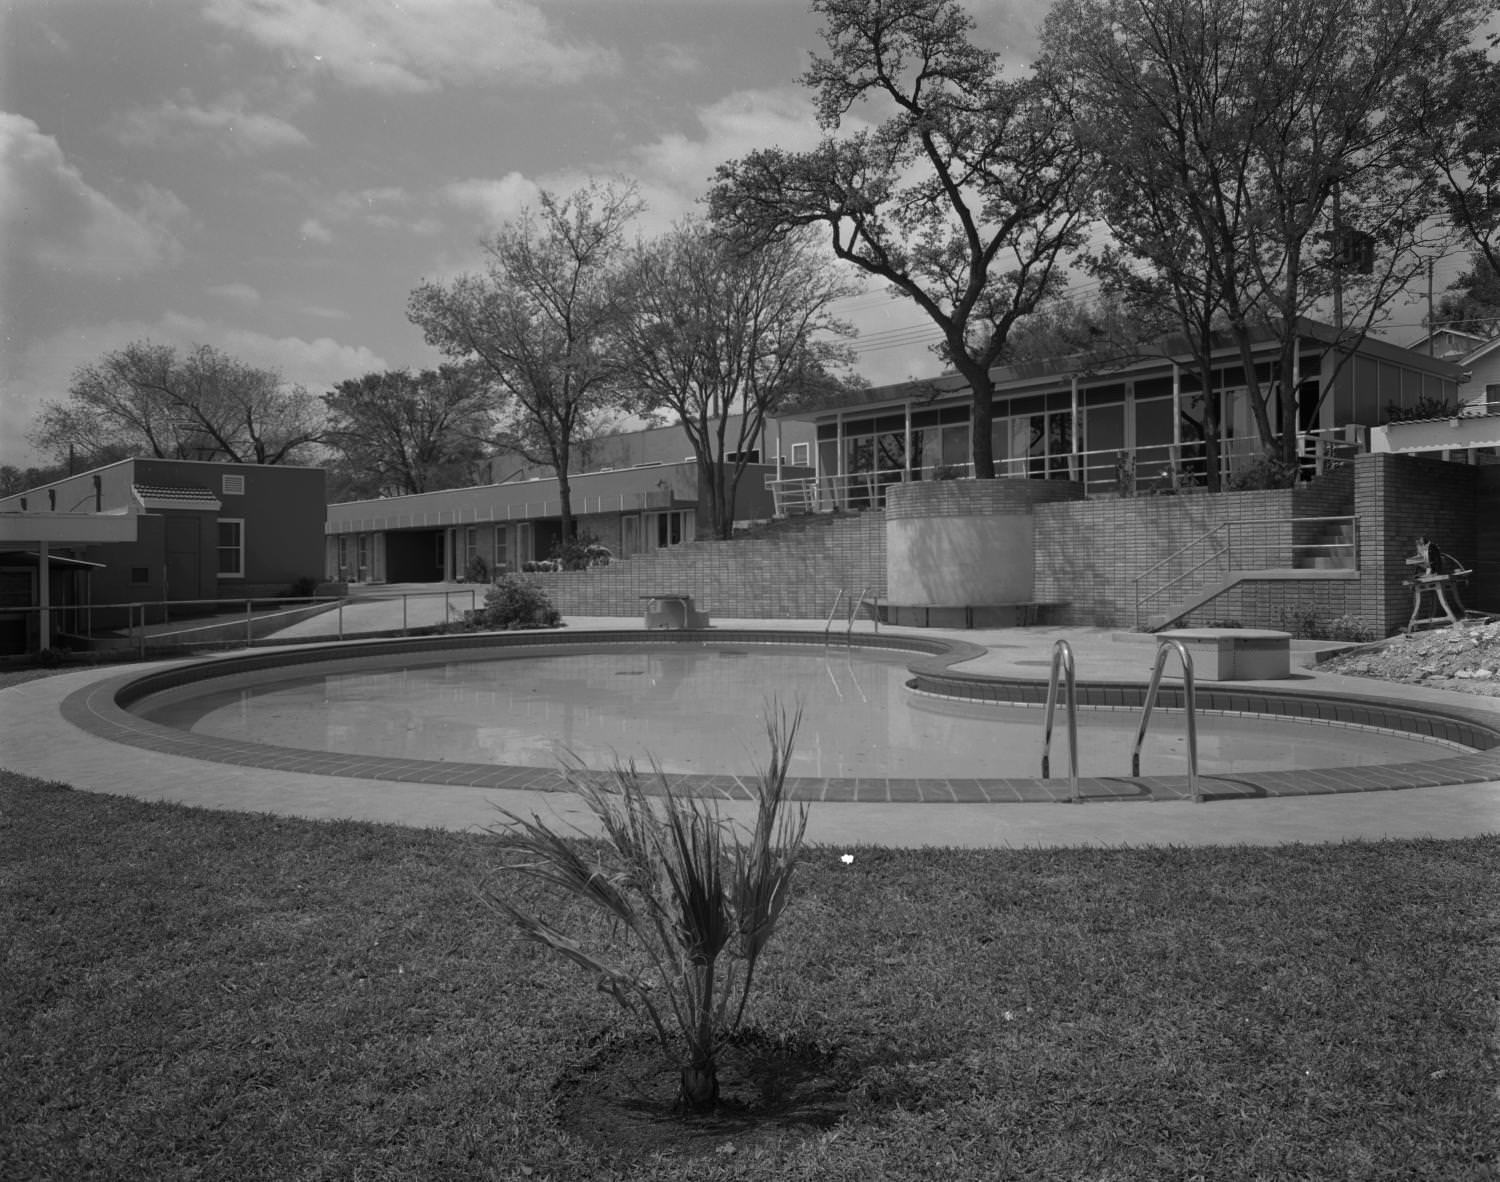 The exterior of Austin Motel, located at 1220 South Congress Avenue. There is a large swimming pool in front of the building, 1955